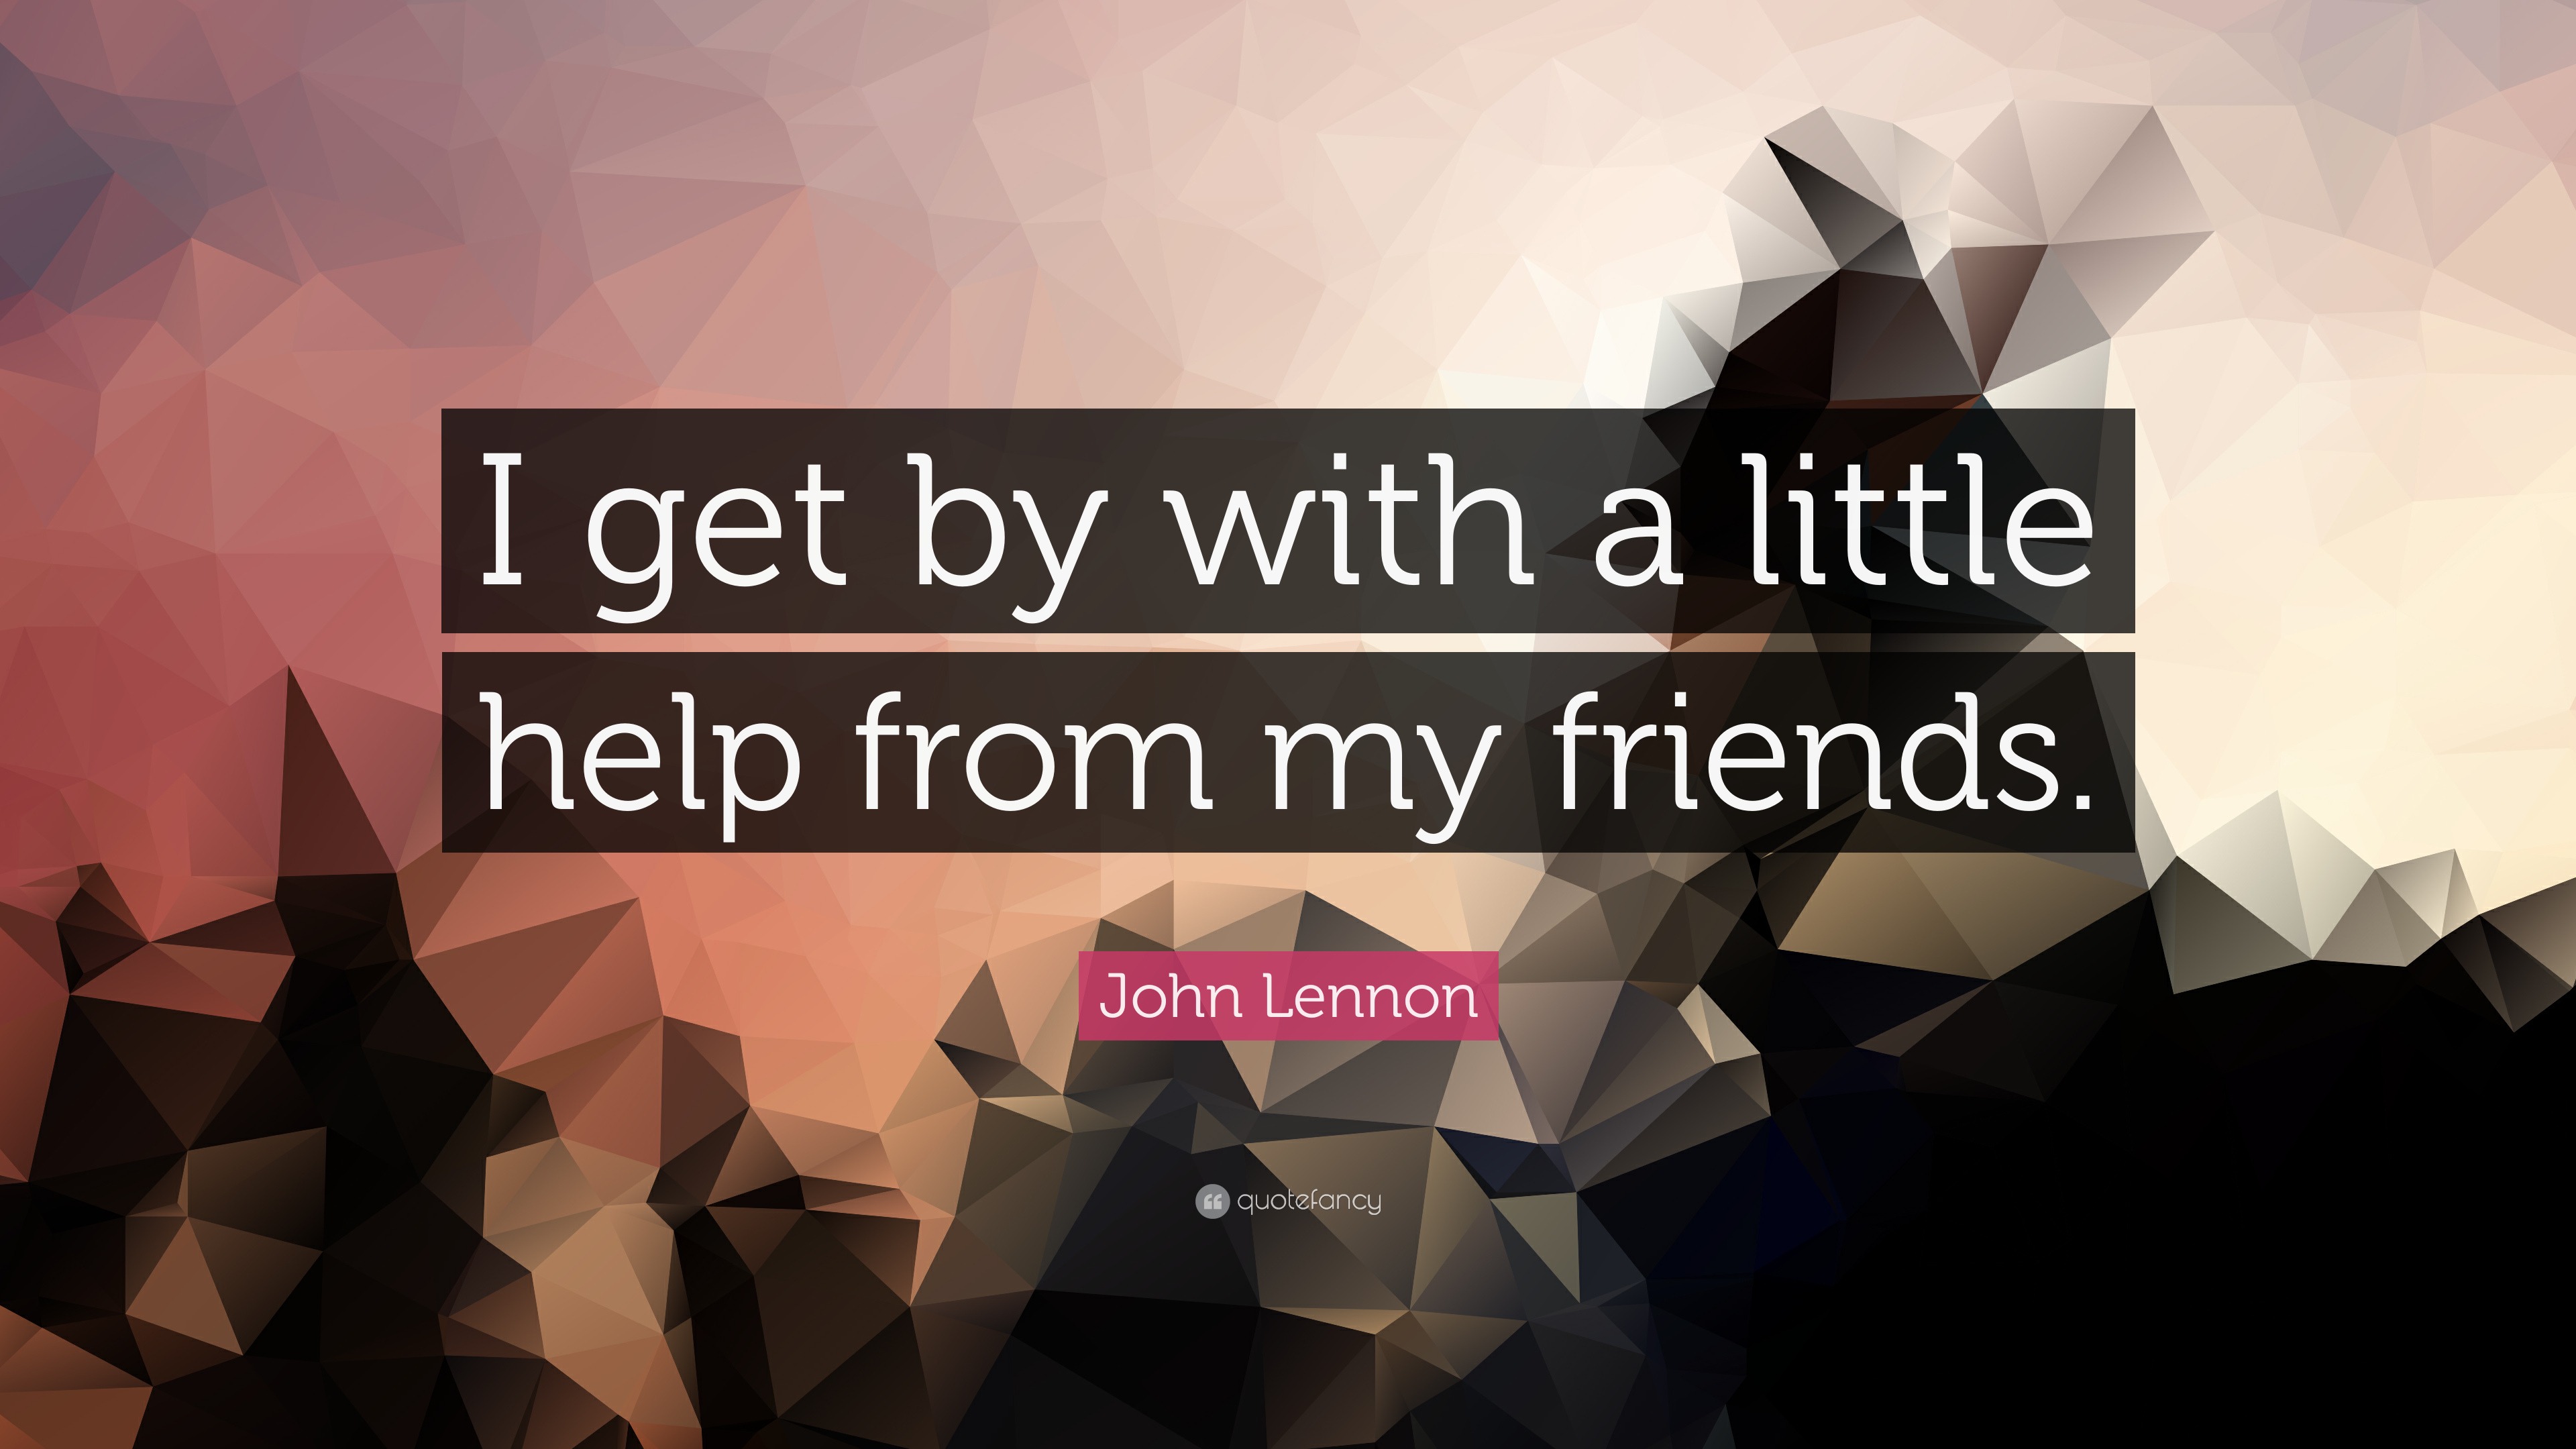 John Lennon Quote: “I get by with a little help from my friends.”